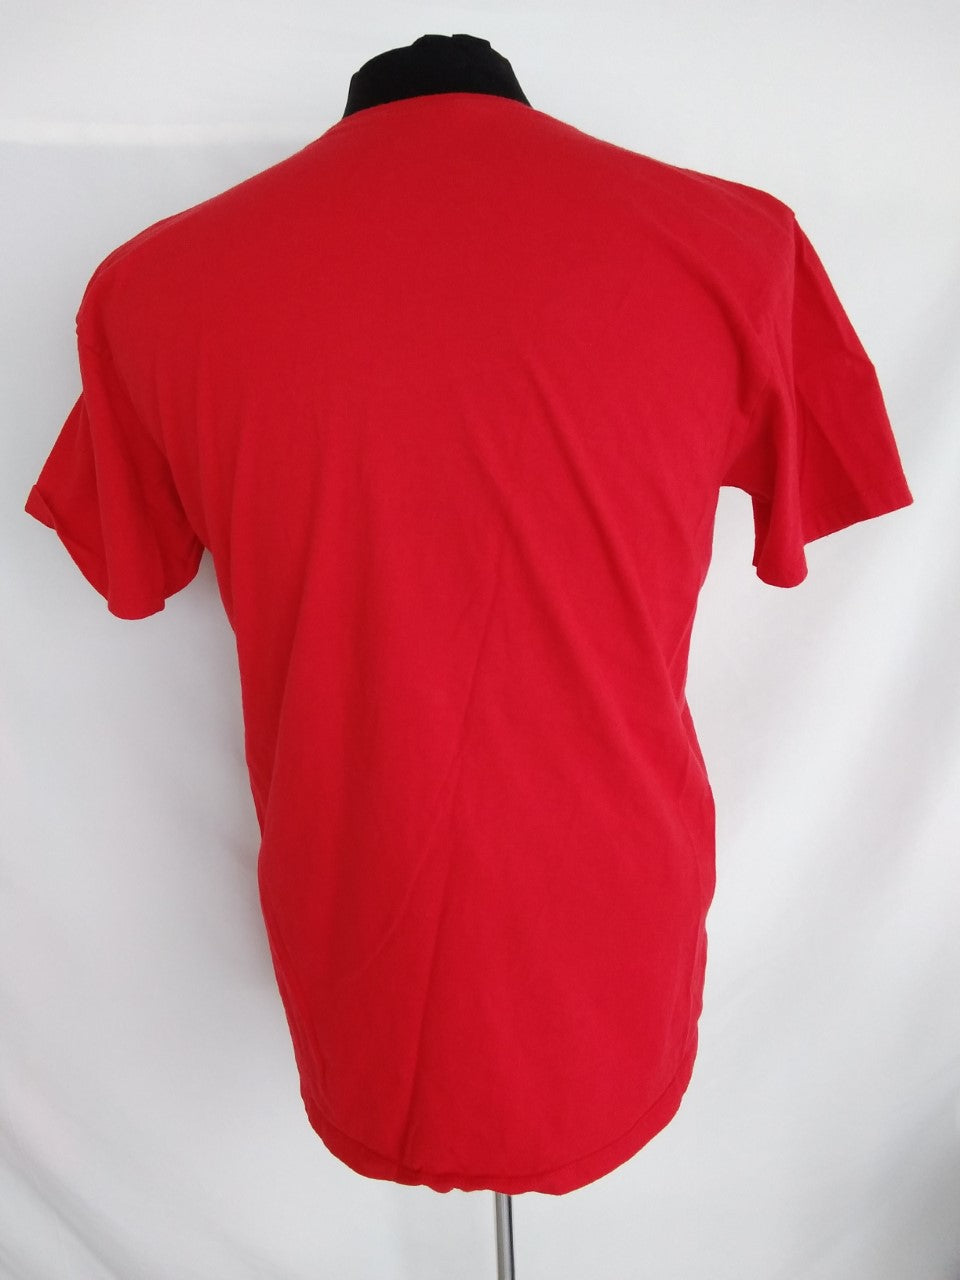 Graphic Tee Red Fe(Iron) Man - Size LG